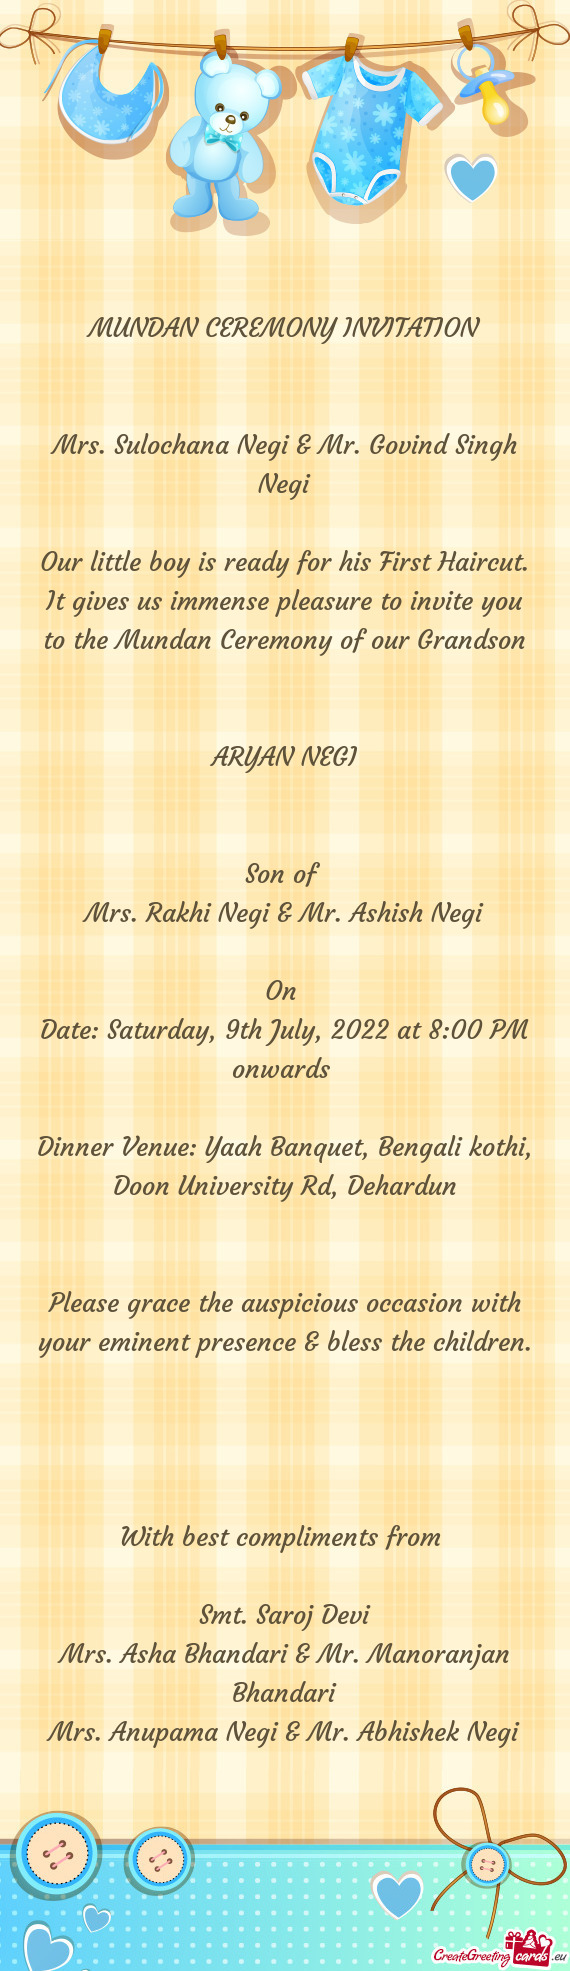 It gives us immense pleasure to invite you to the Mundan Ceremony of our Grandson